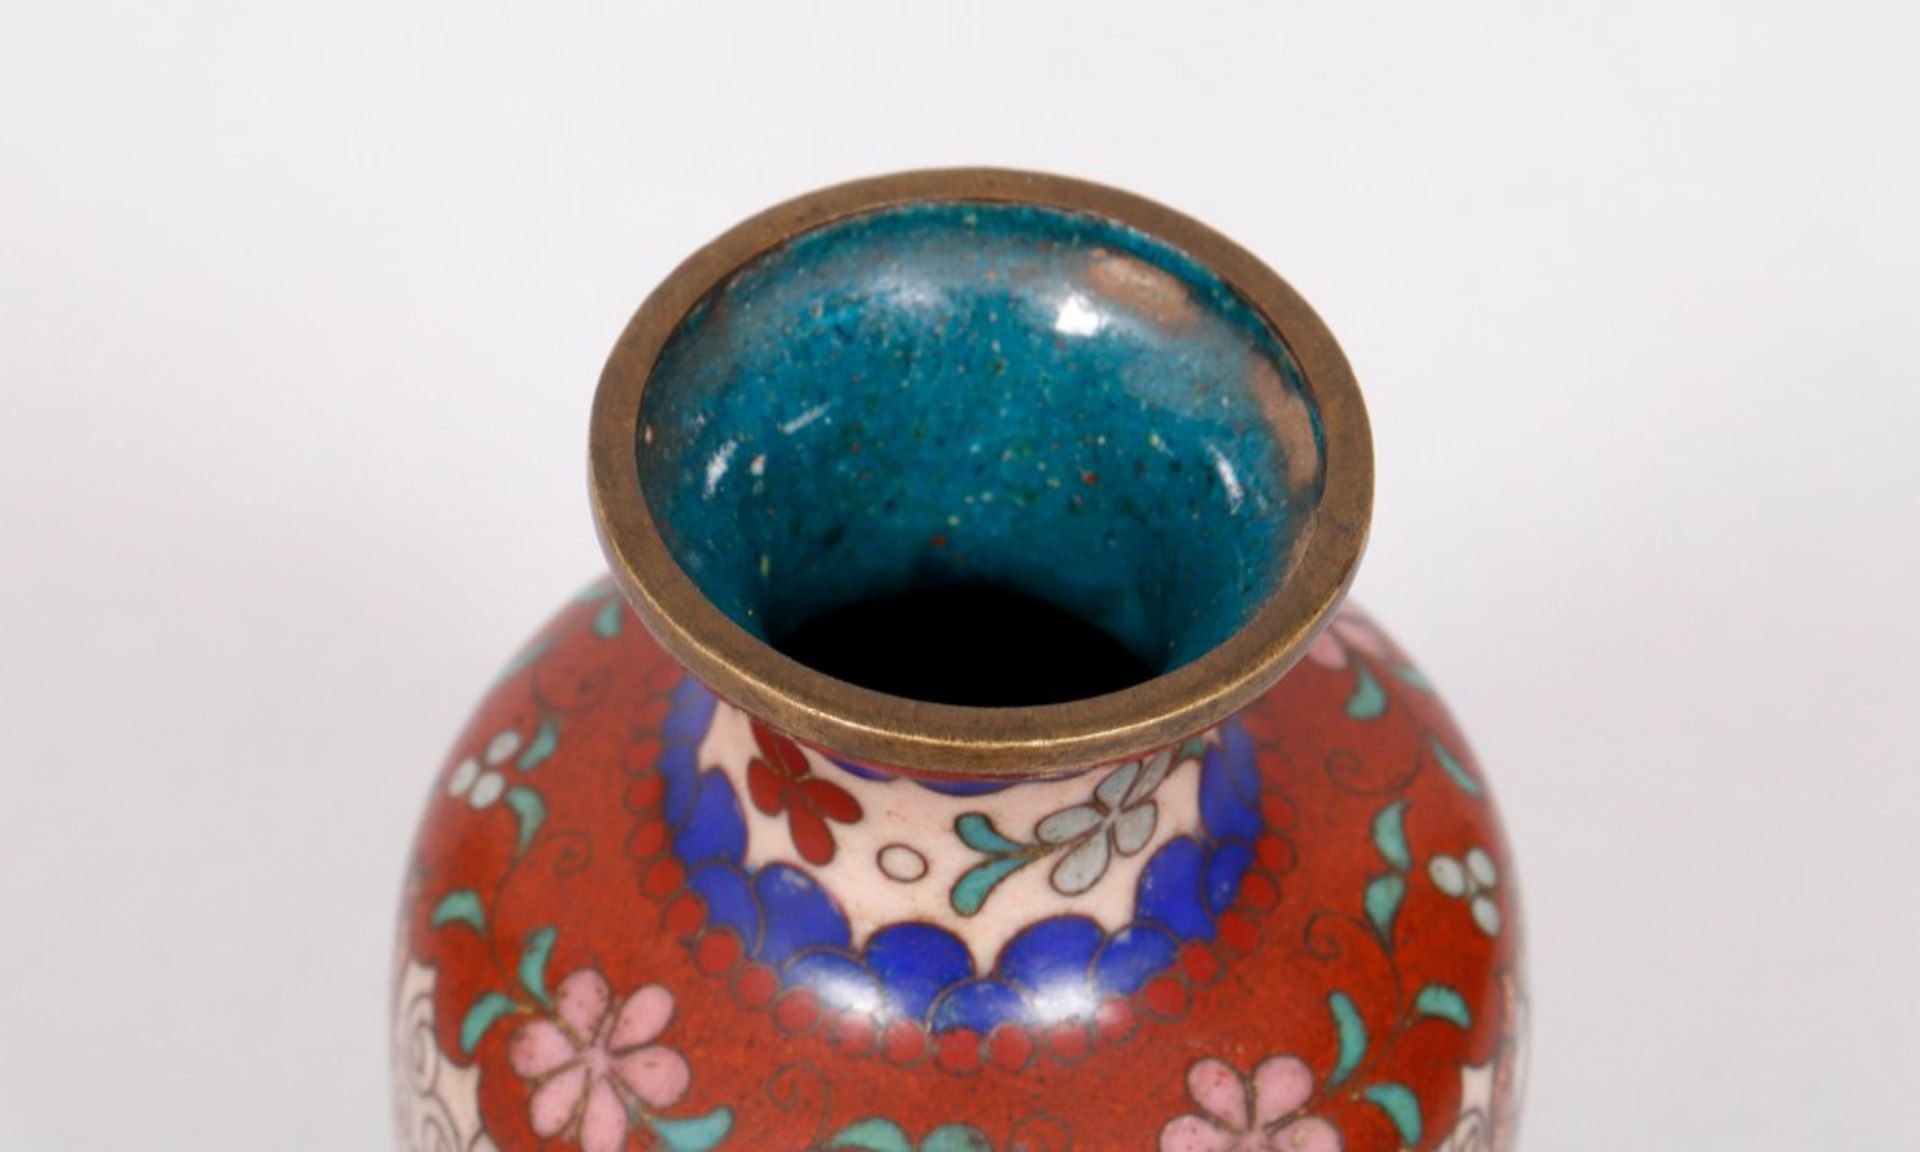 Small cloisonne vase, China, Qing period - Image 4 of 5